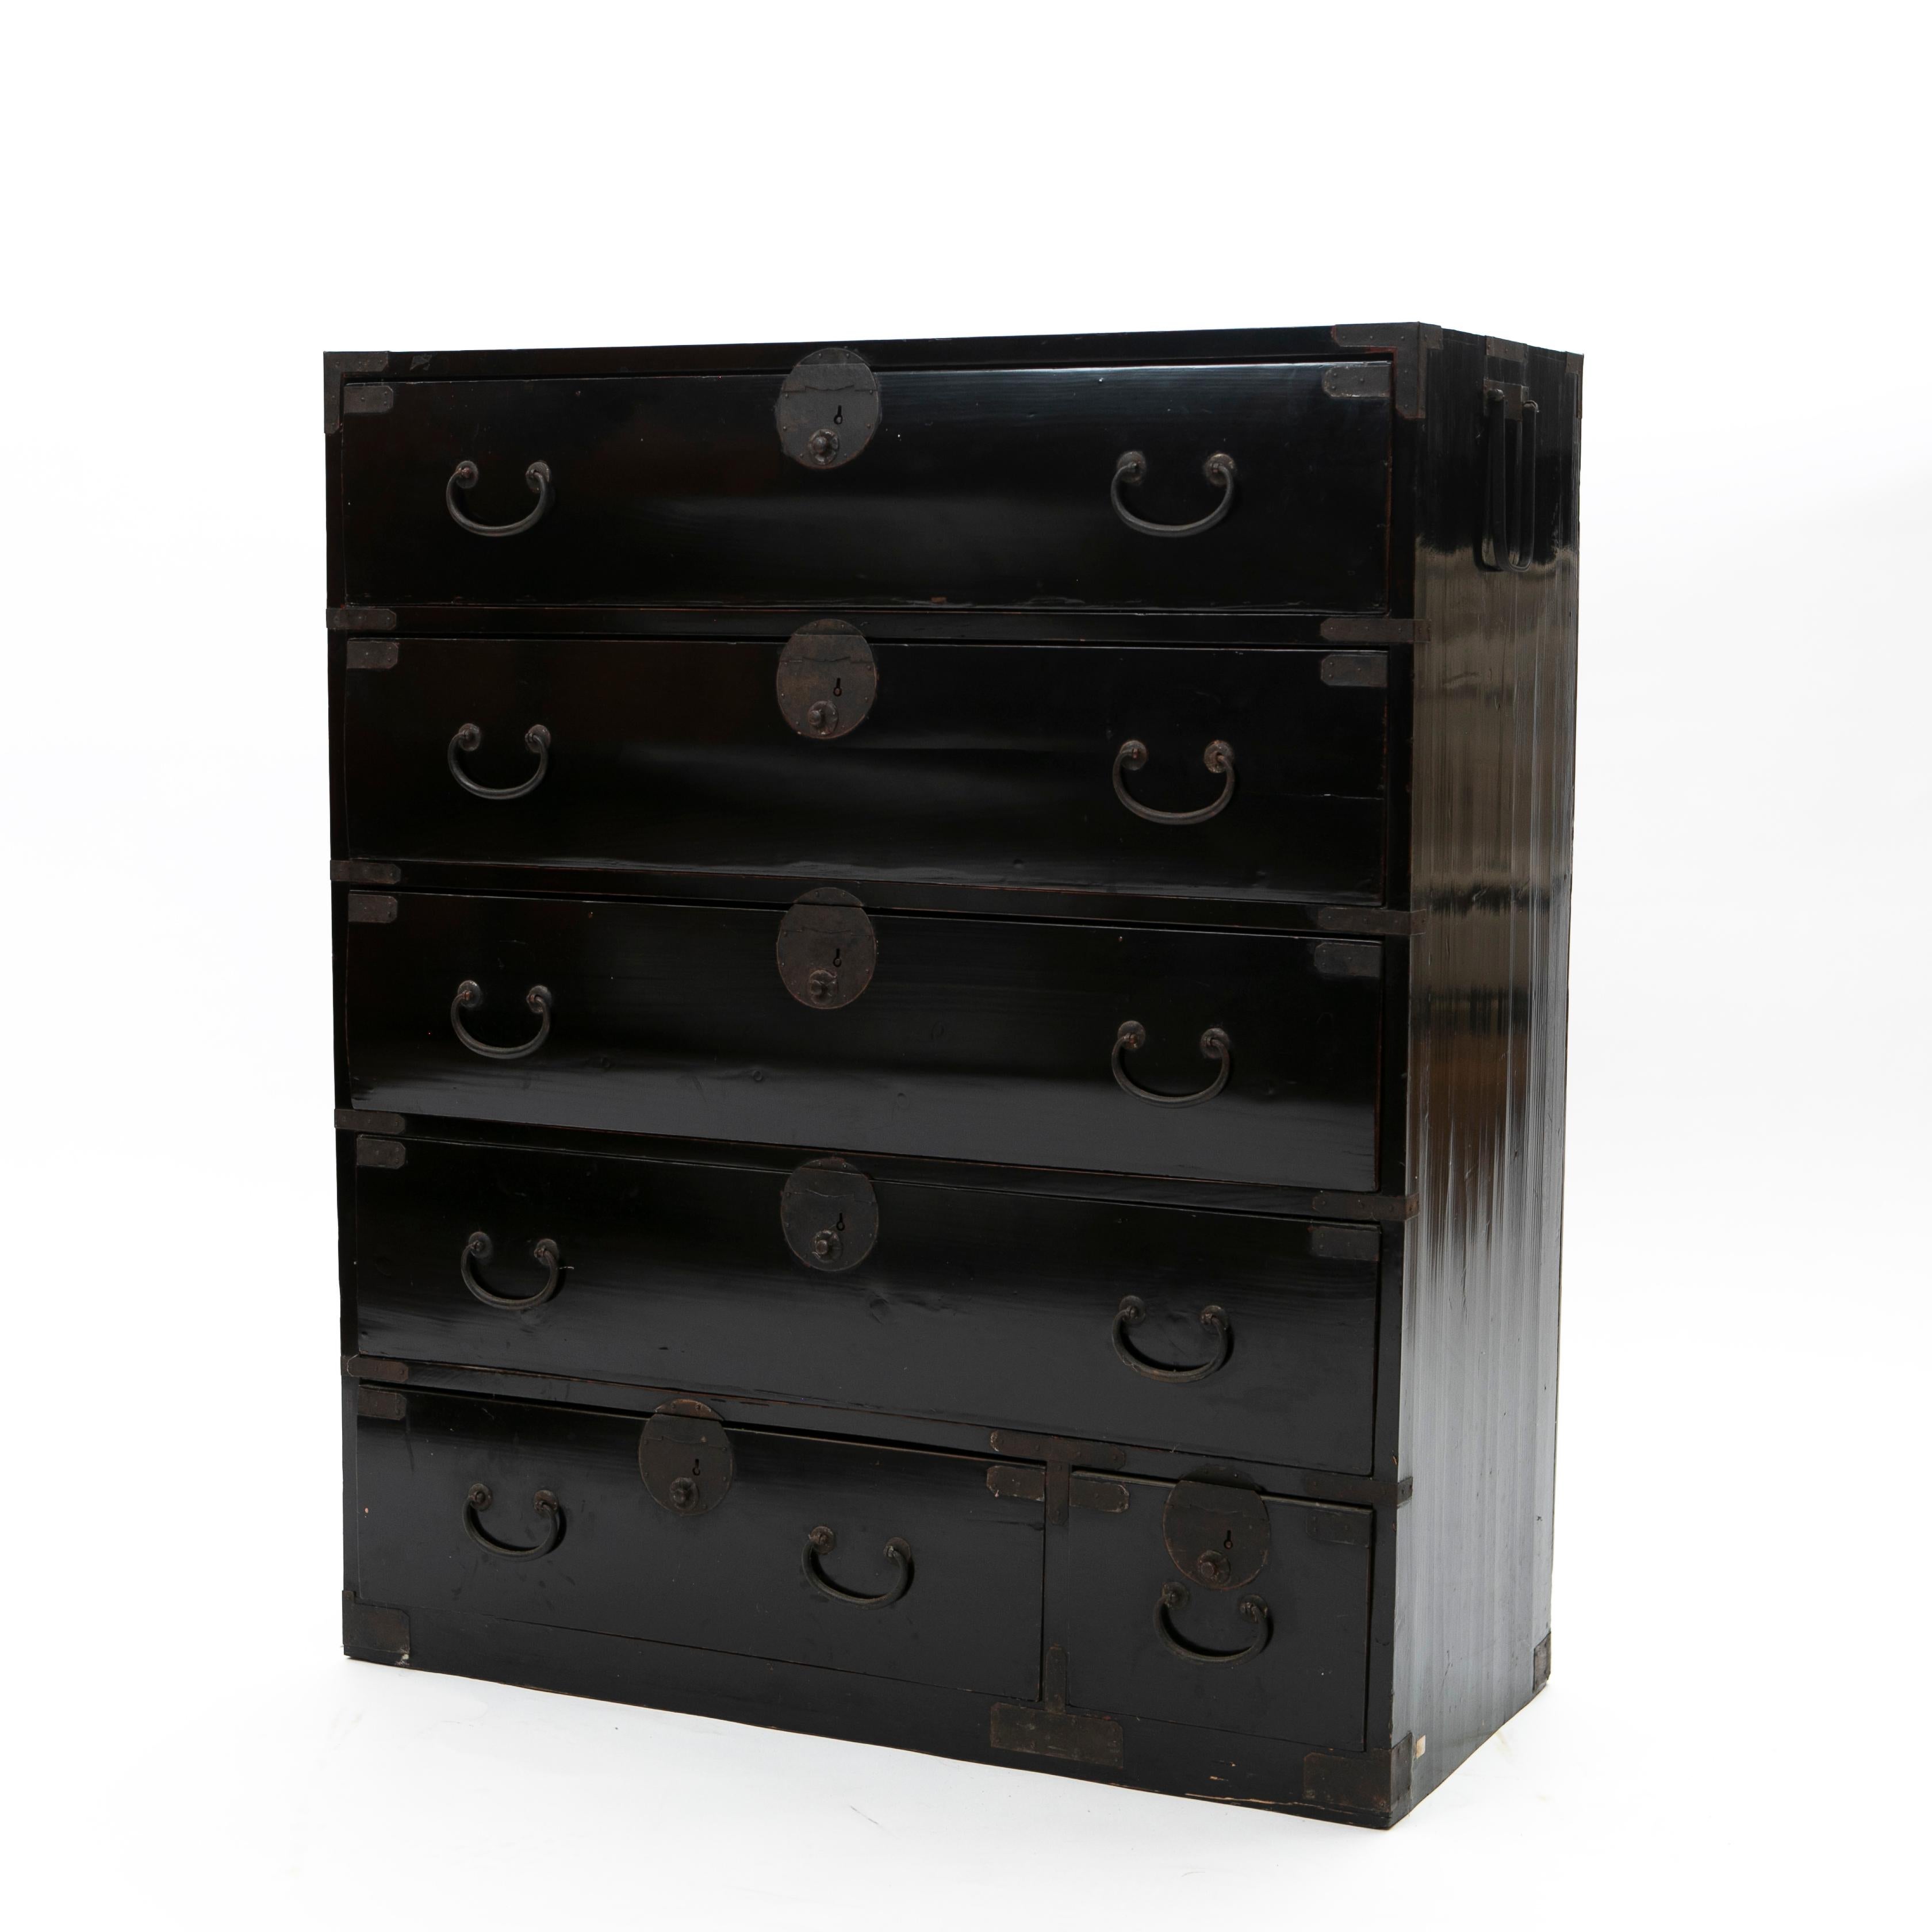 A Japanese Meiji period six drawer tansu chest. 
This façade showcases four large drawers followed by a medium and a smaller one placed in the lower section.

Black lacquered pine wood fitted with original iron handles and hardware. Carrying handles